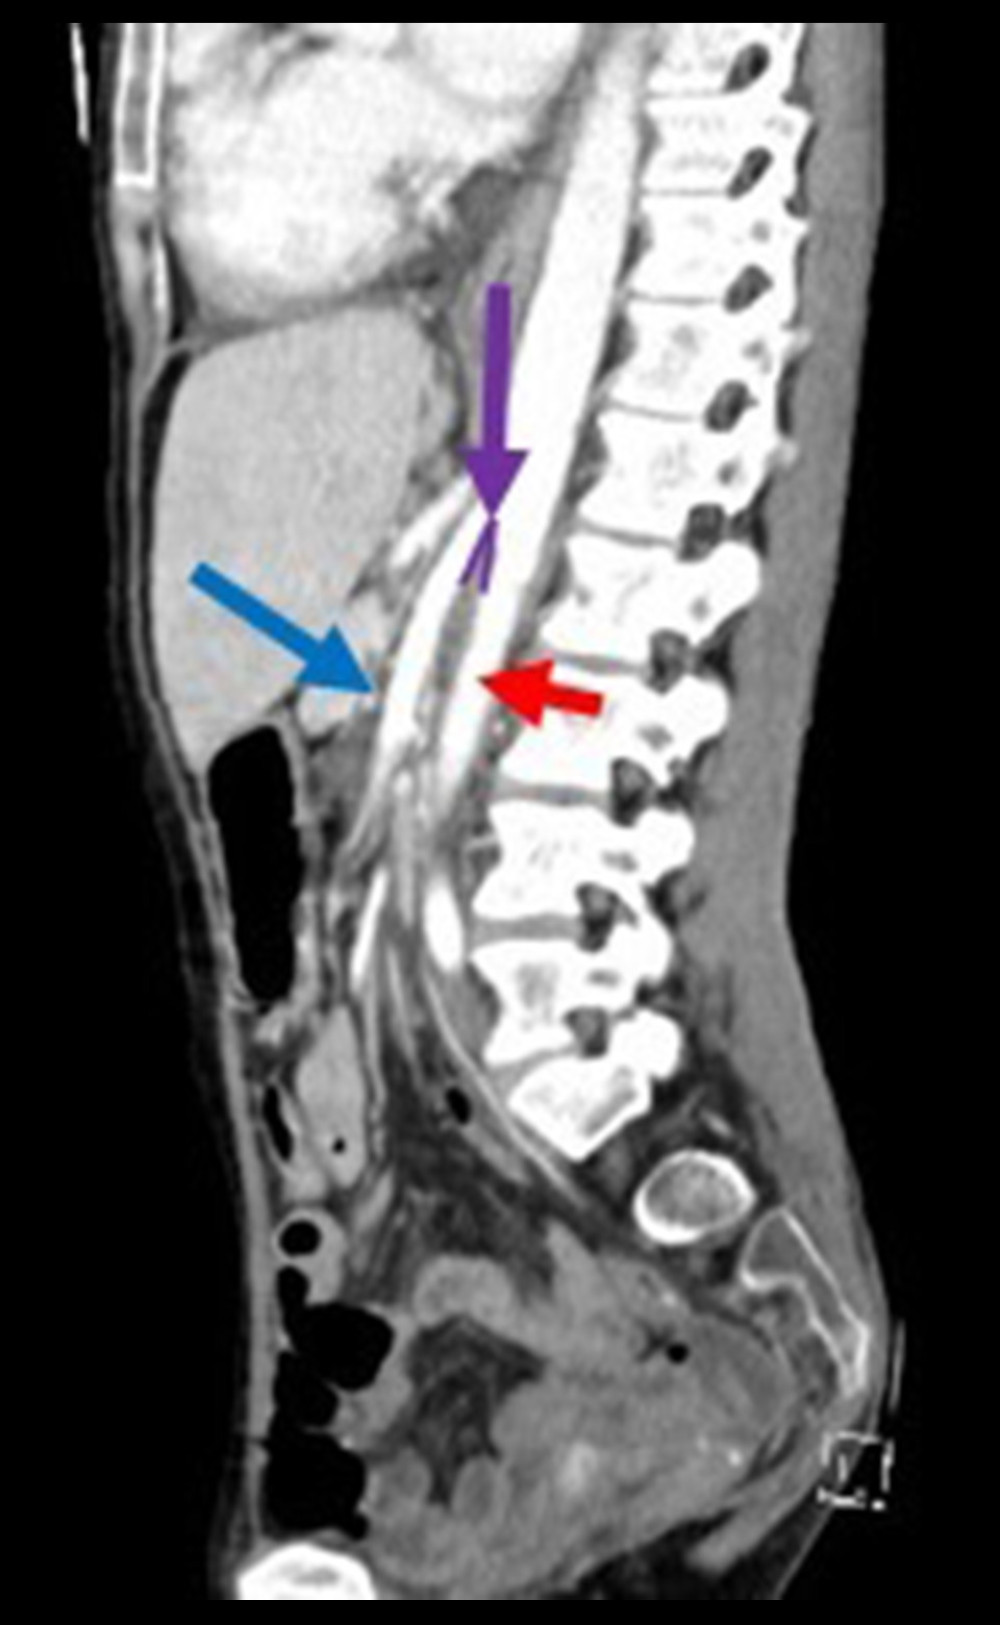 Sagittal computed tomography (right) demonstrating the superior mesenteric artery (blue arrow) arising from the aorta (red arrow), forming a narrow aortosuperior mesenteric artery of 16° (purple arrow).